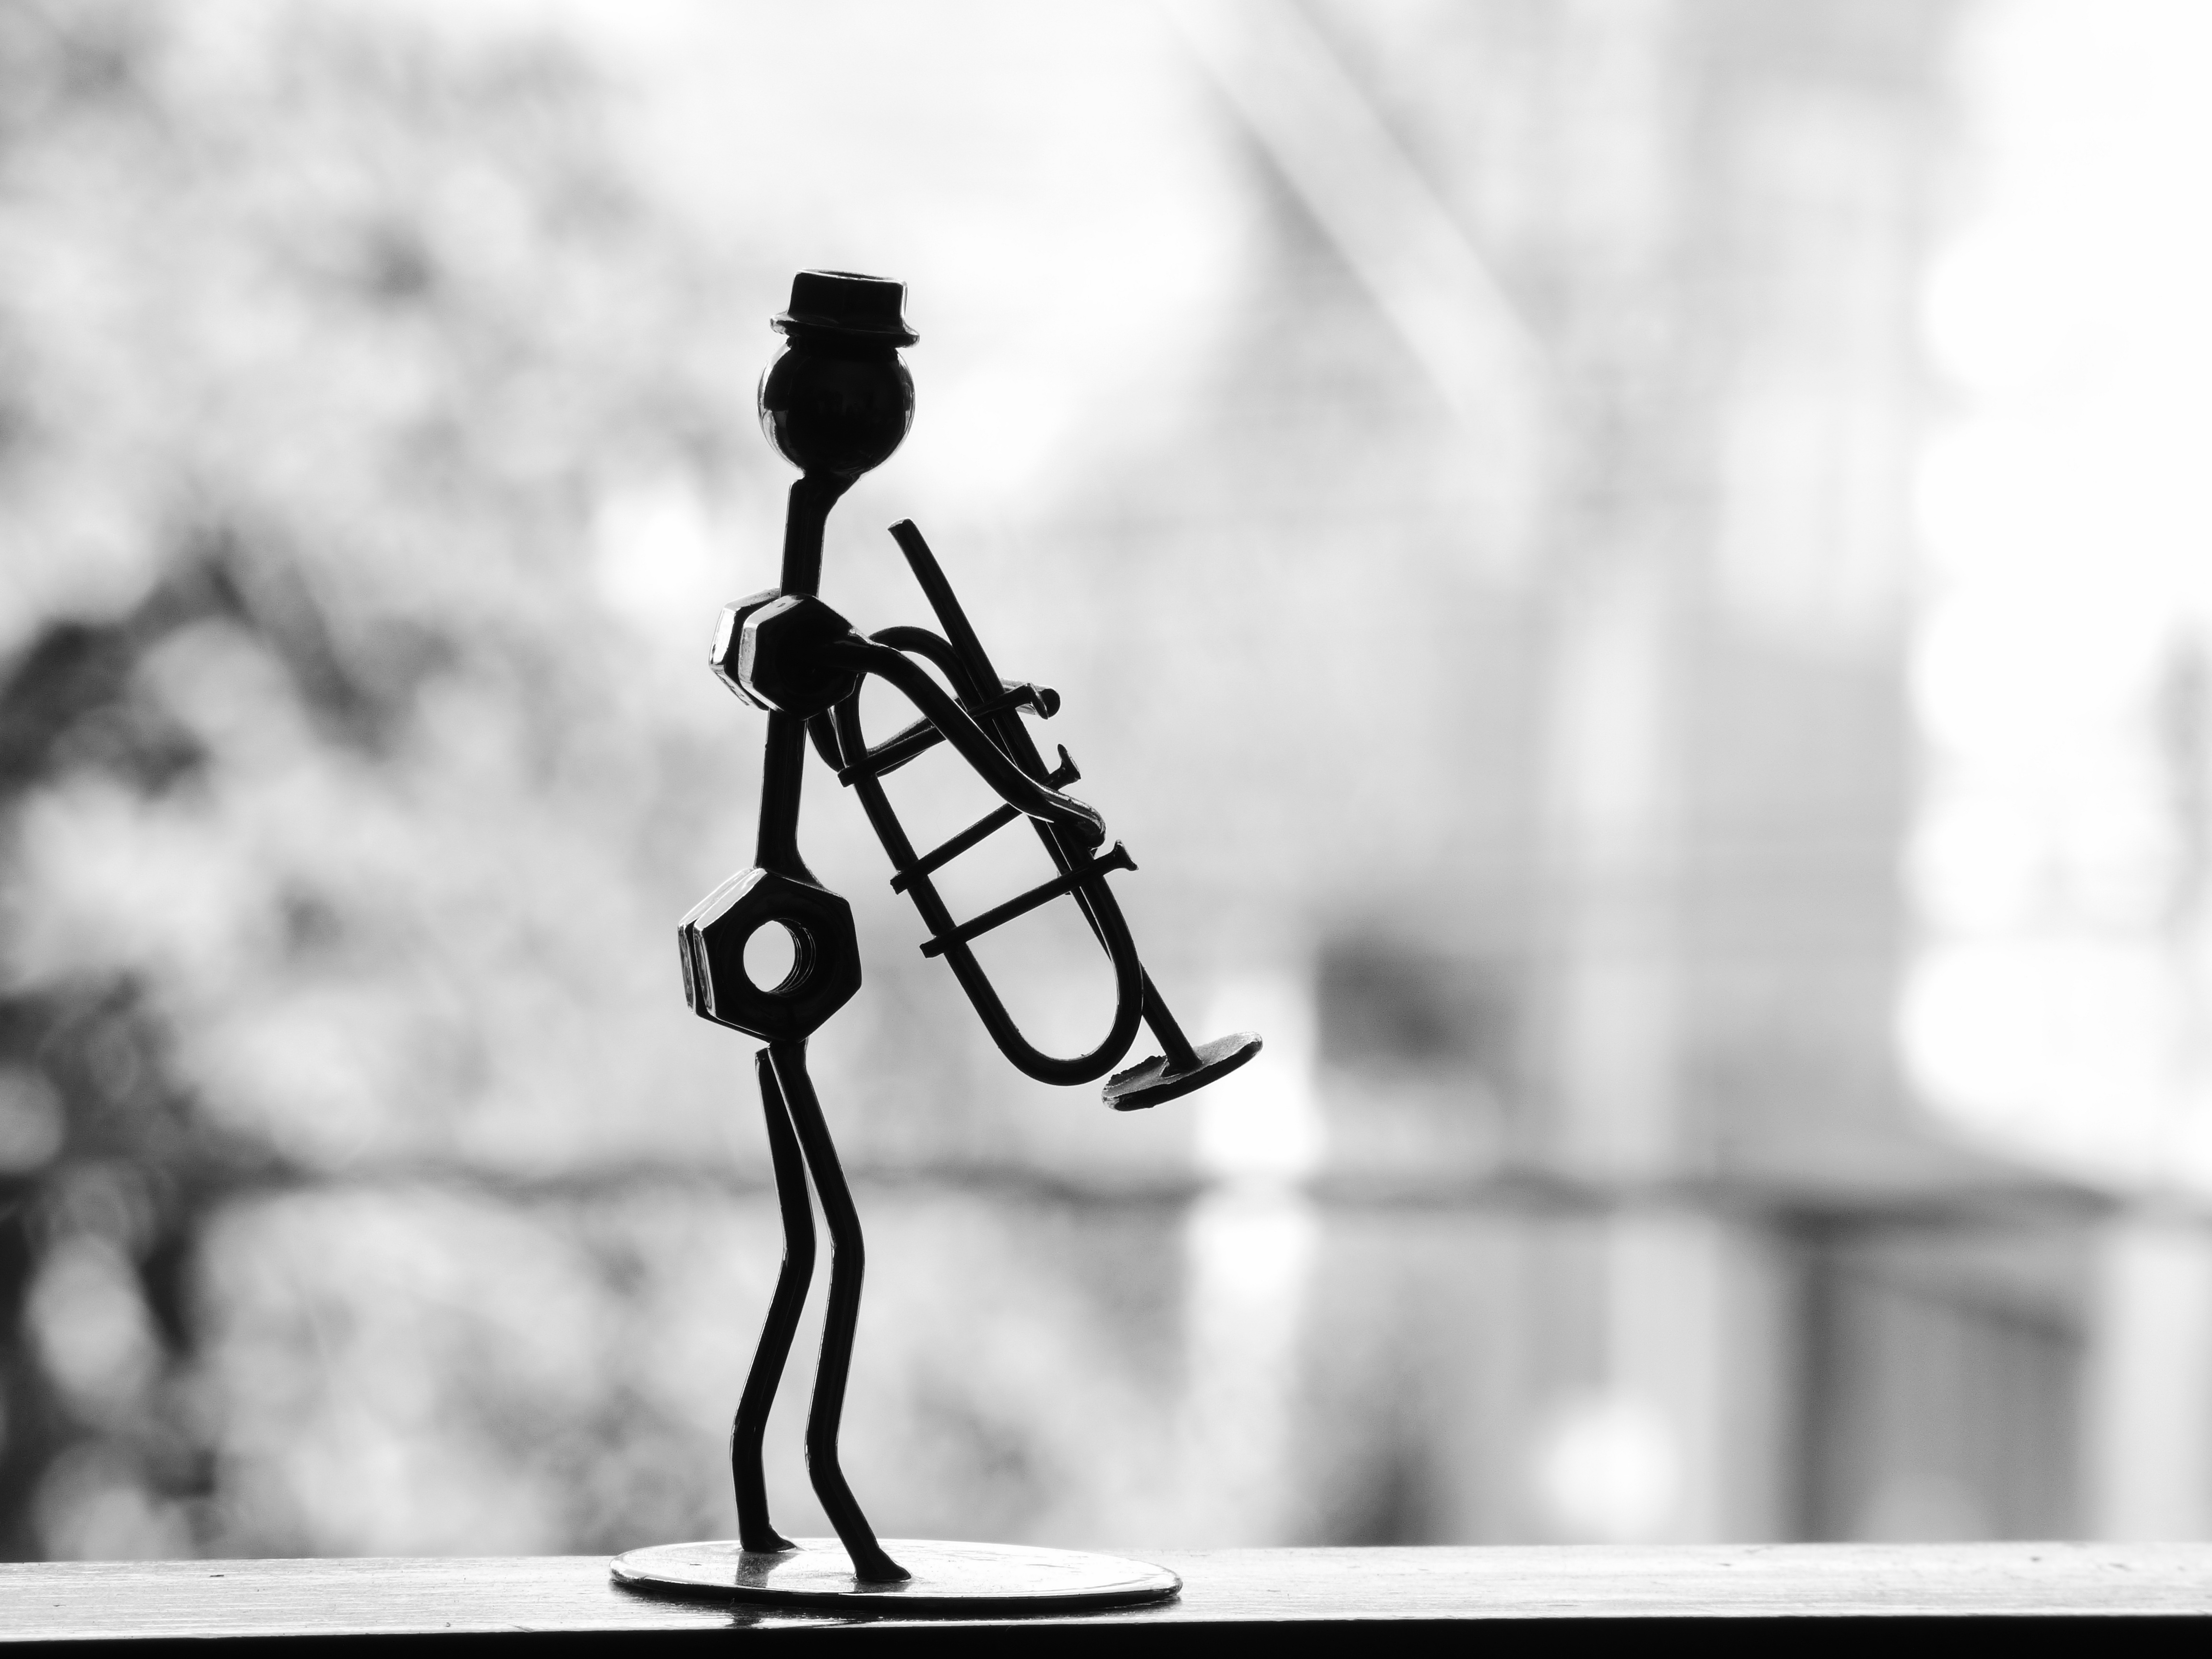 Popular Trumpet Image for Phone